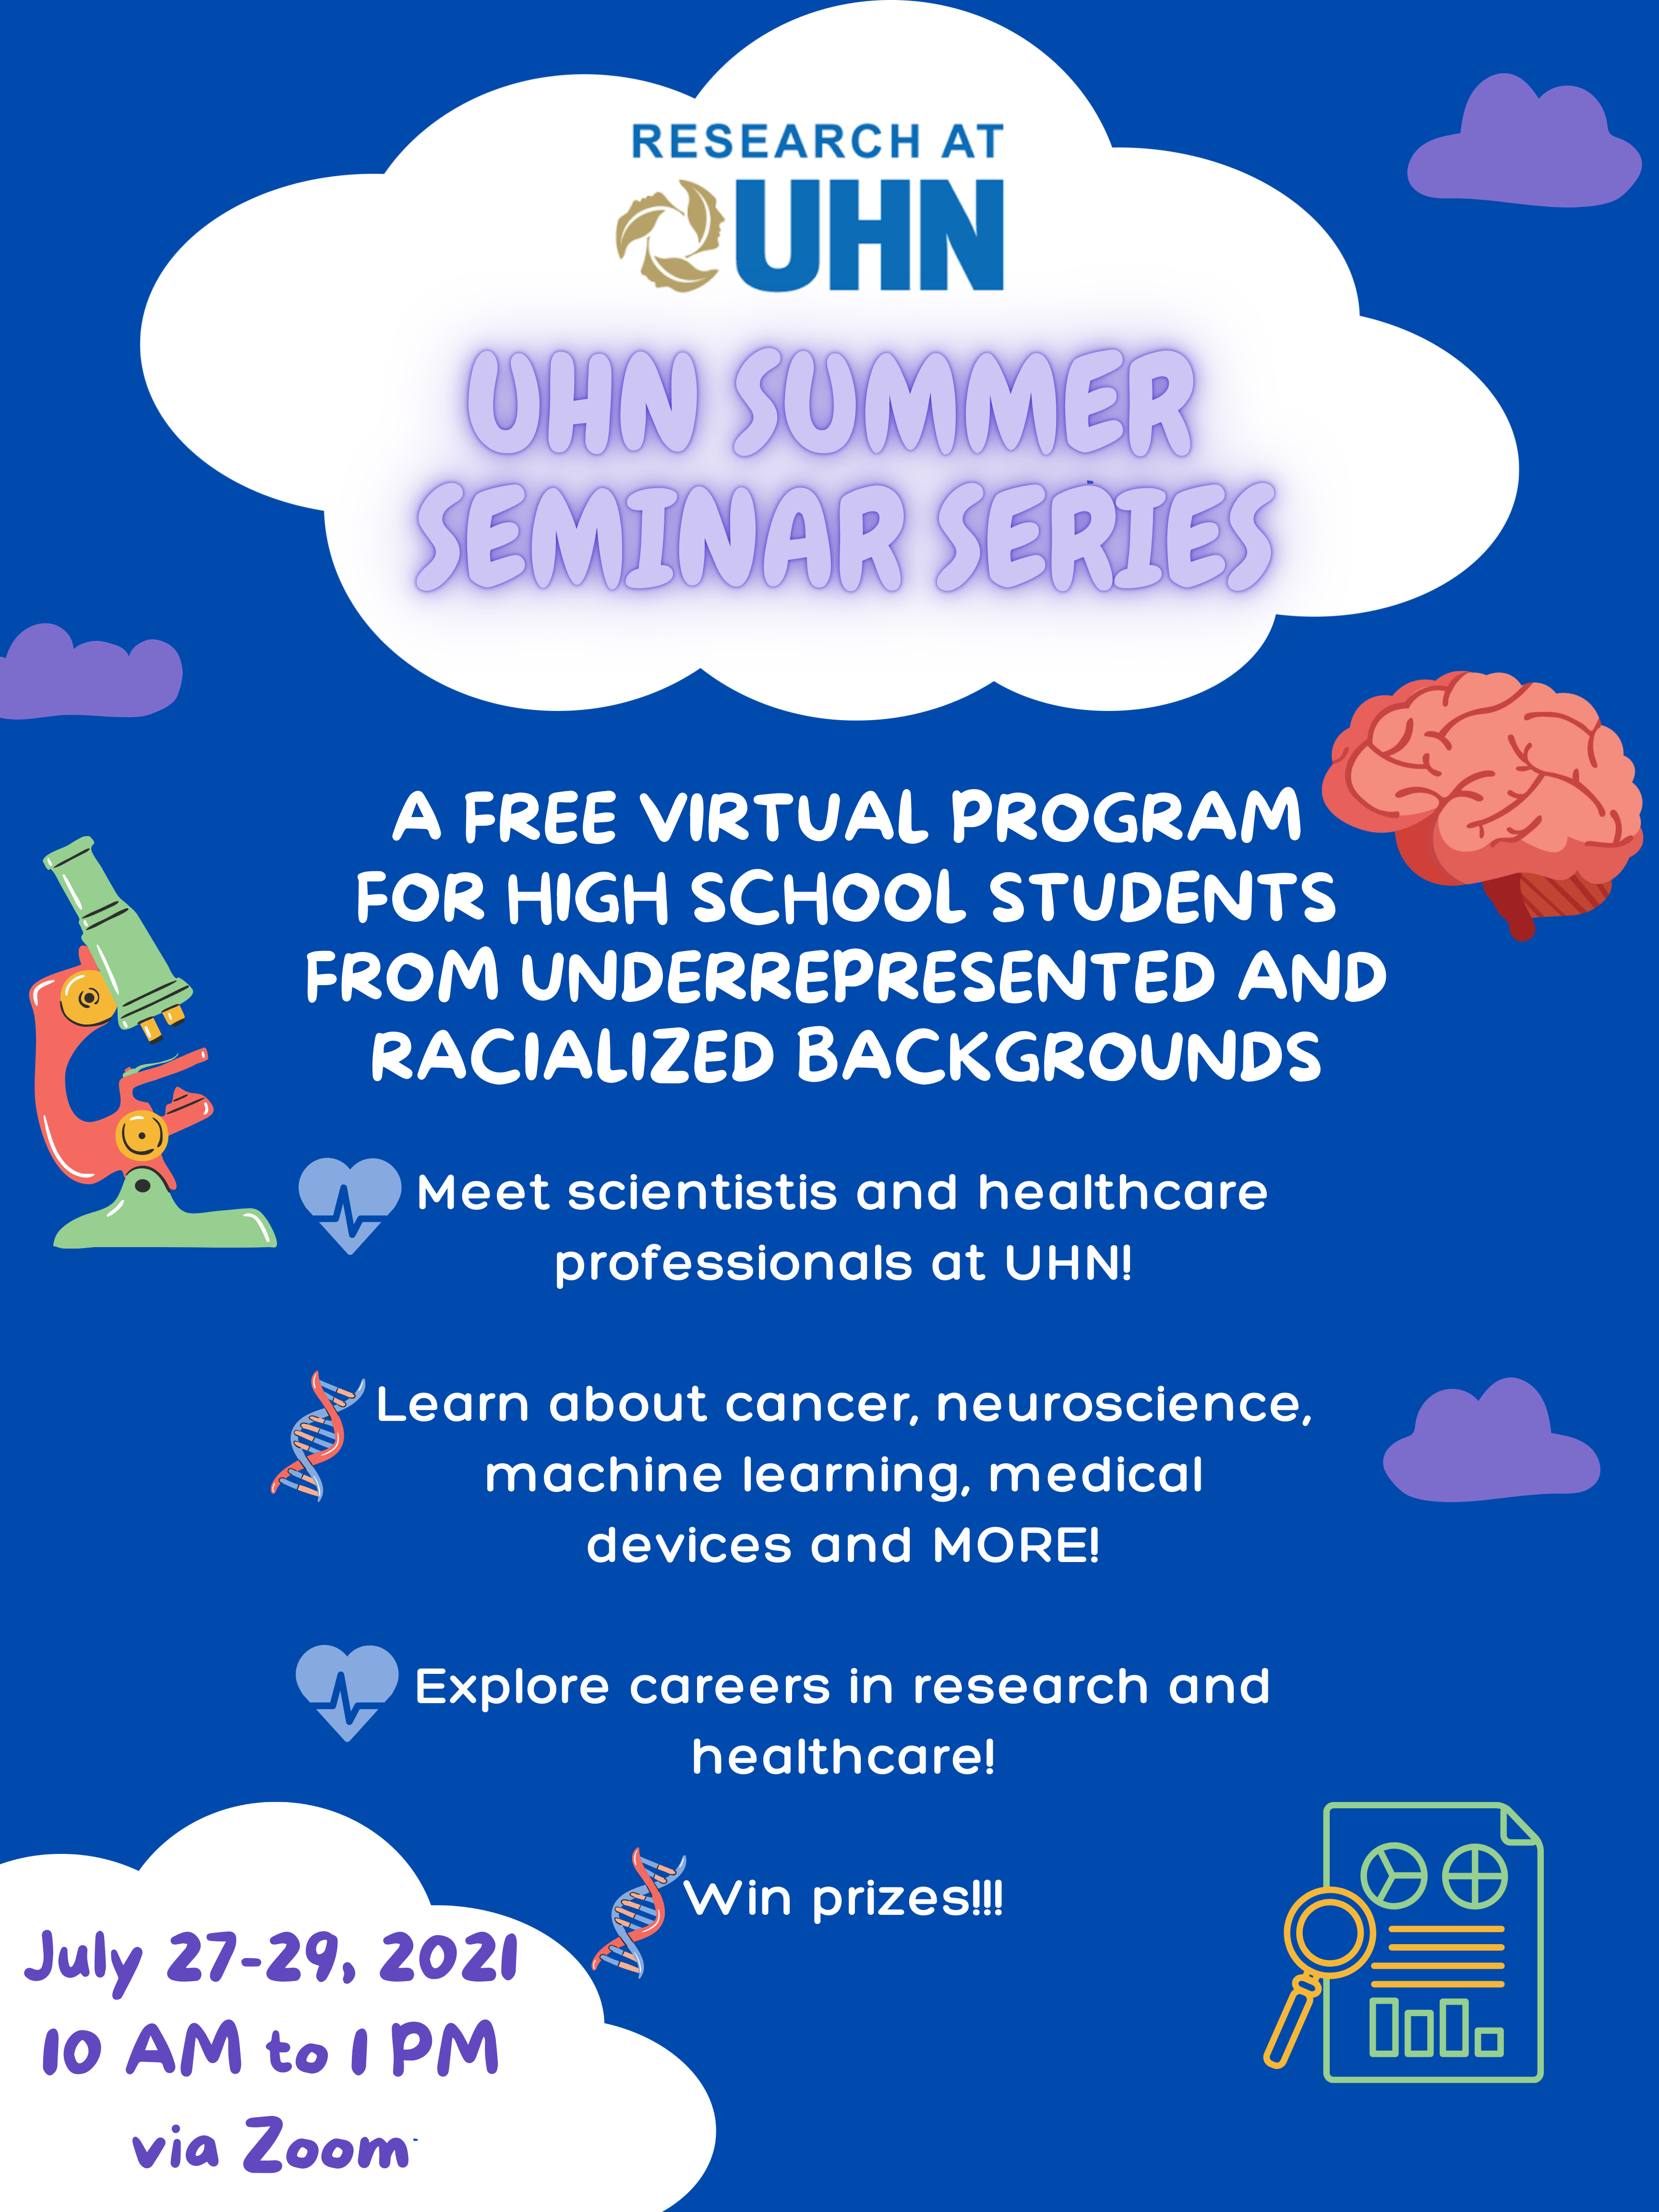 A poster for Research at UHN's UHN Summer Seminar Series. A free virtual program for high school students from underrepresented and racialized communities. Meet scientists and healthcare professionals at UHN. Learn about cancer, neuroscience, machine learning, medical devices, and more. Explore careers in research and healthcare. Win Prizes. July 27-29, 10 am to 1 pm, via Zoom